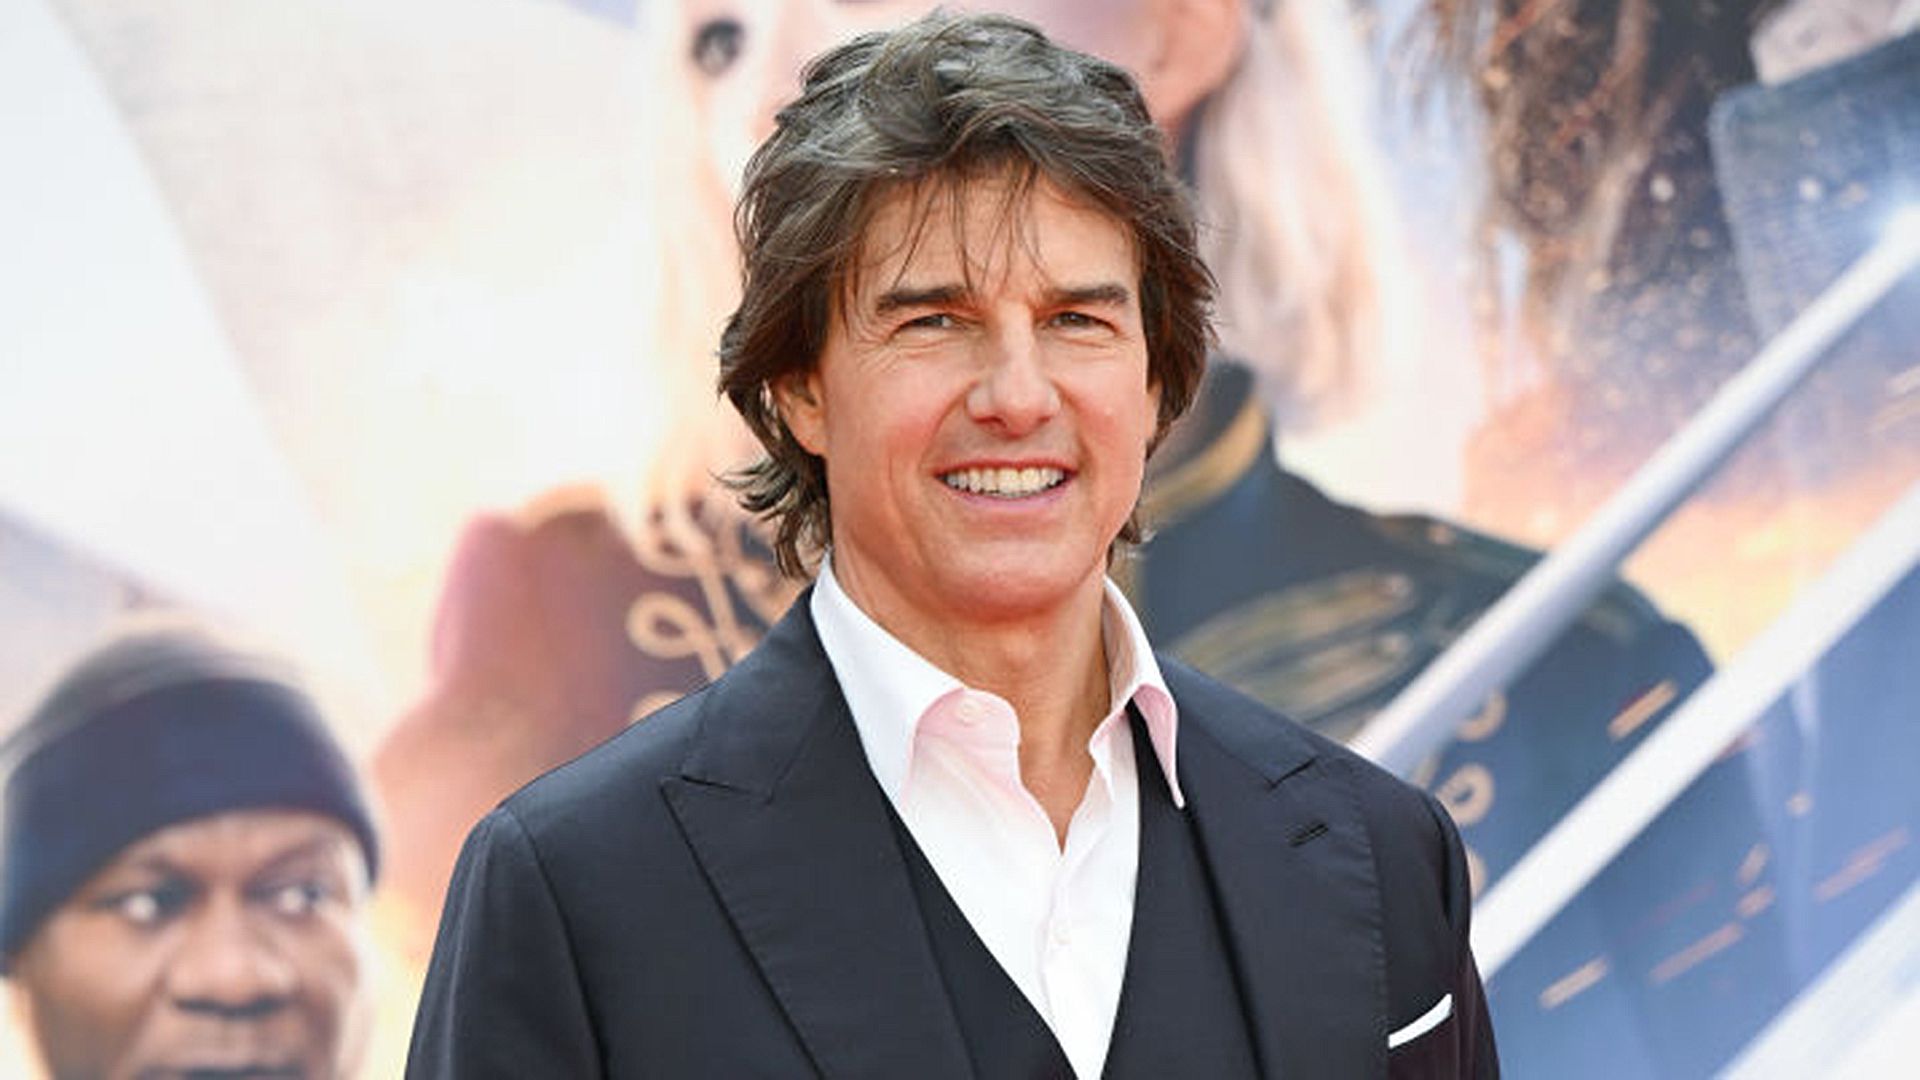 Tom Cruise reveals details of his major career first at glitzy Mission Impossible 7 premiere